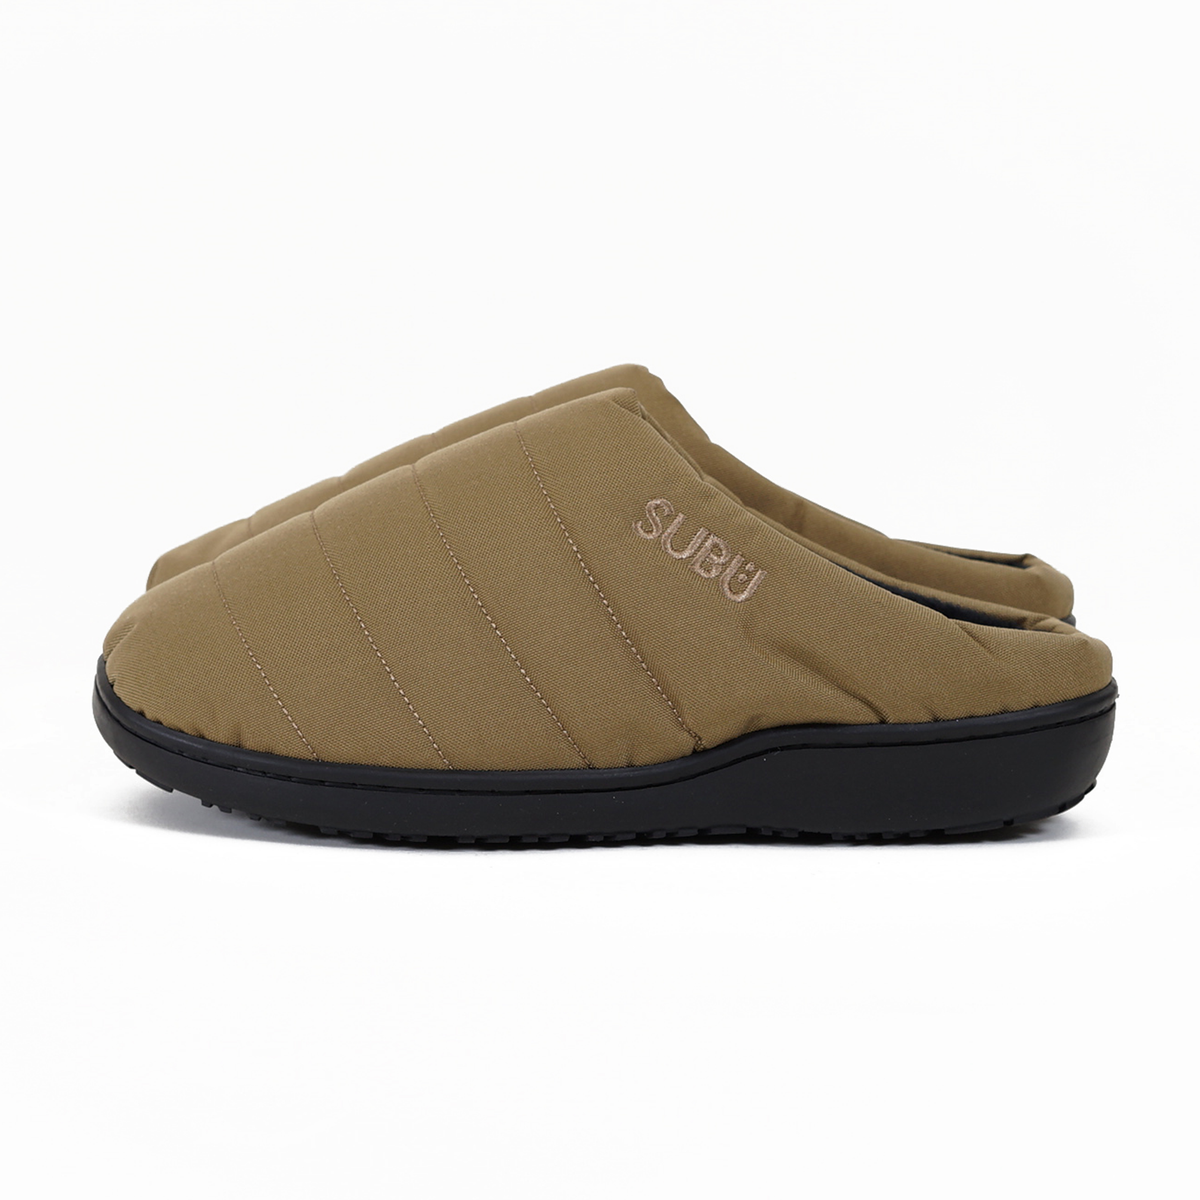 SUBU, Nannen Outdoor Slippers Coyote, Size, 0, Slippers,